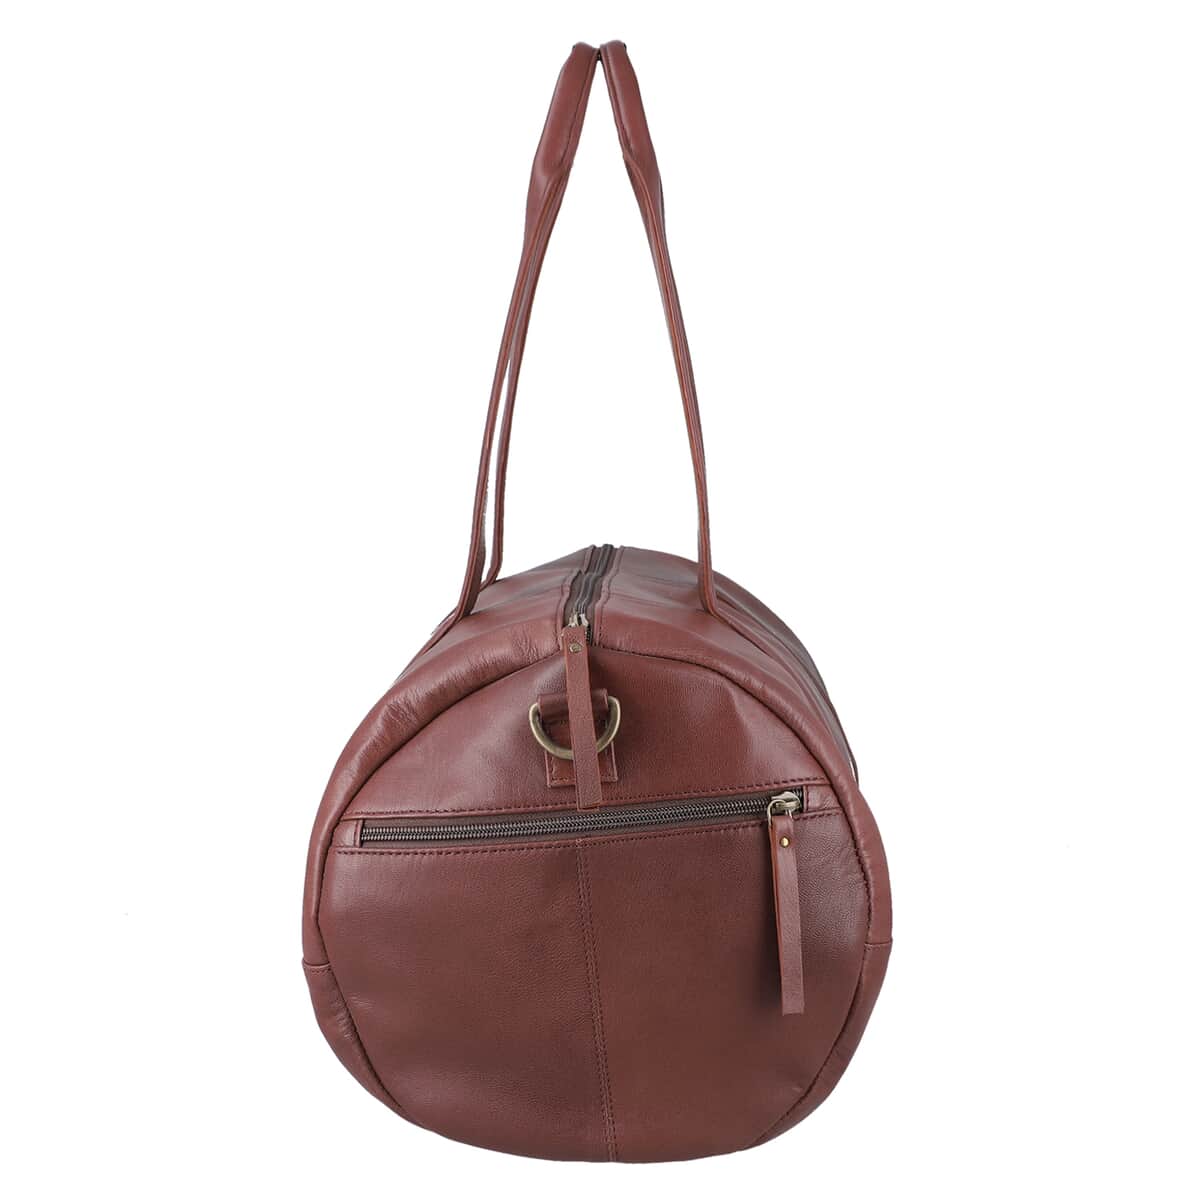 "100% Genuine Vintage Leather Duffle Bag, Color: Dark Brown, Size : 15L x 9.75HX10W inch" image number 6